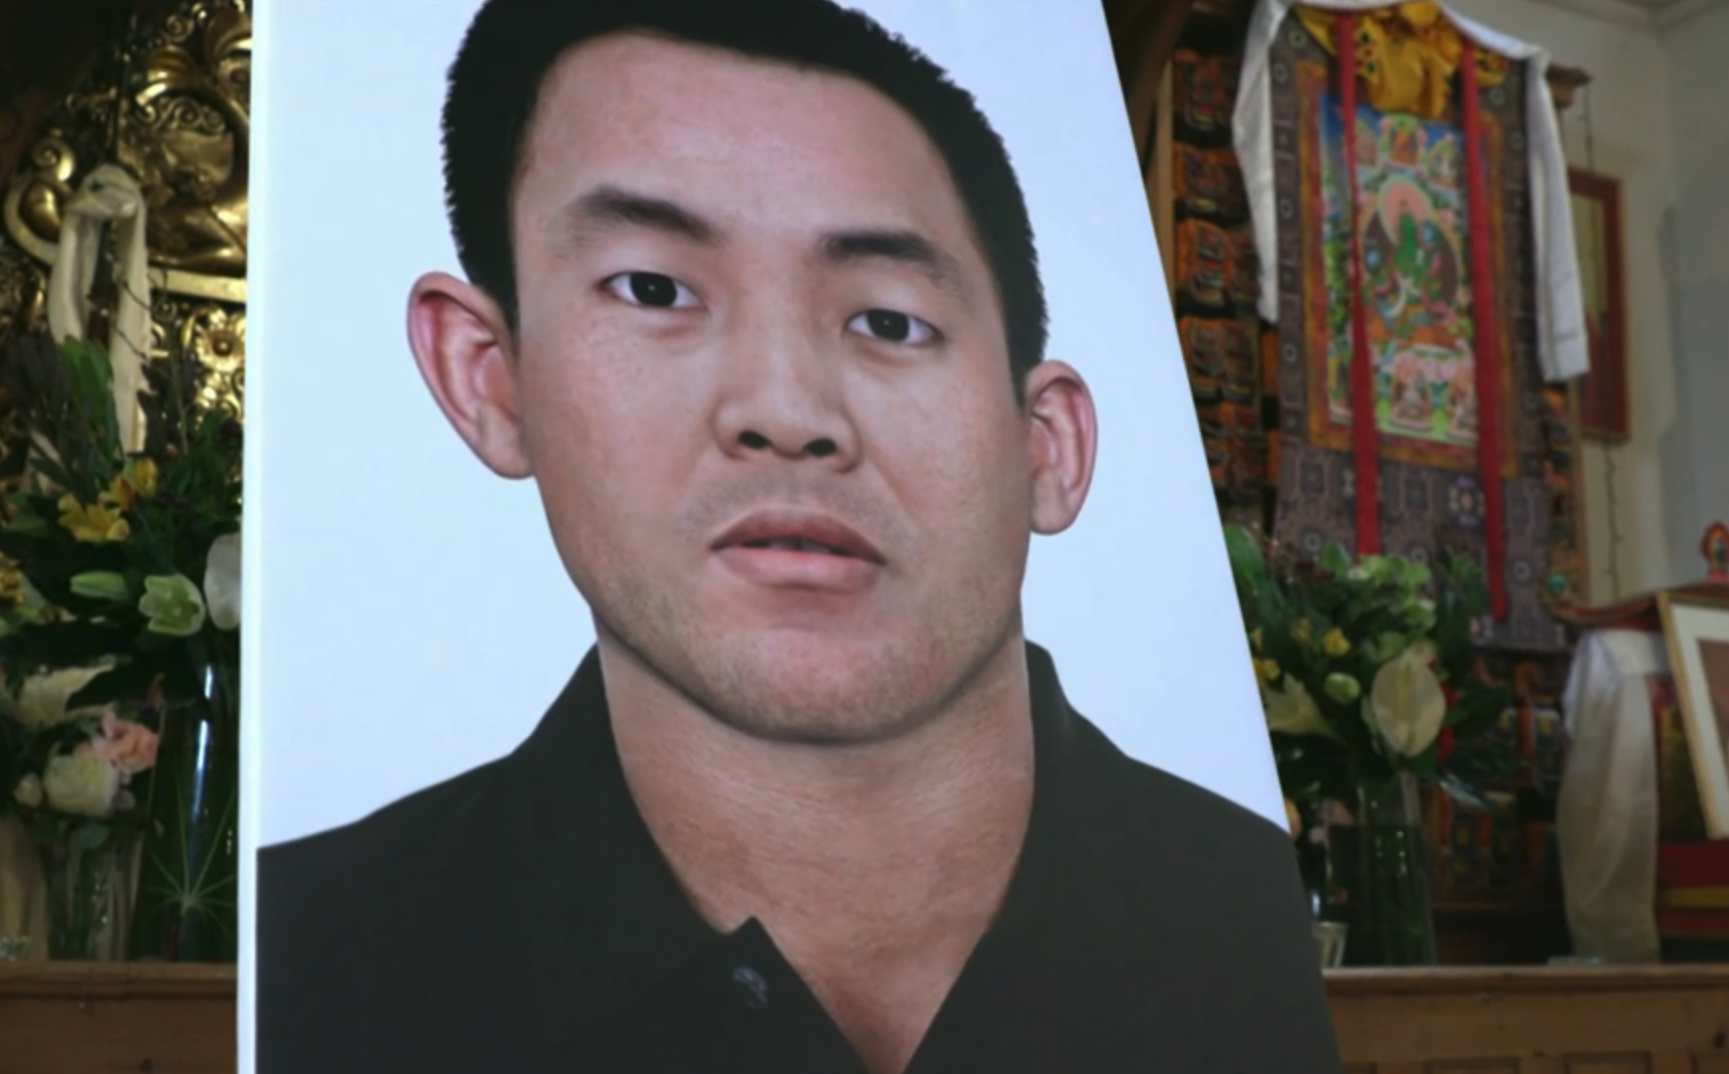 Artist's impression of how the Panchen Lama may appear today